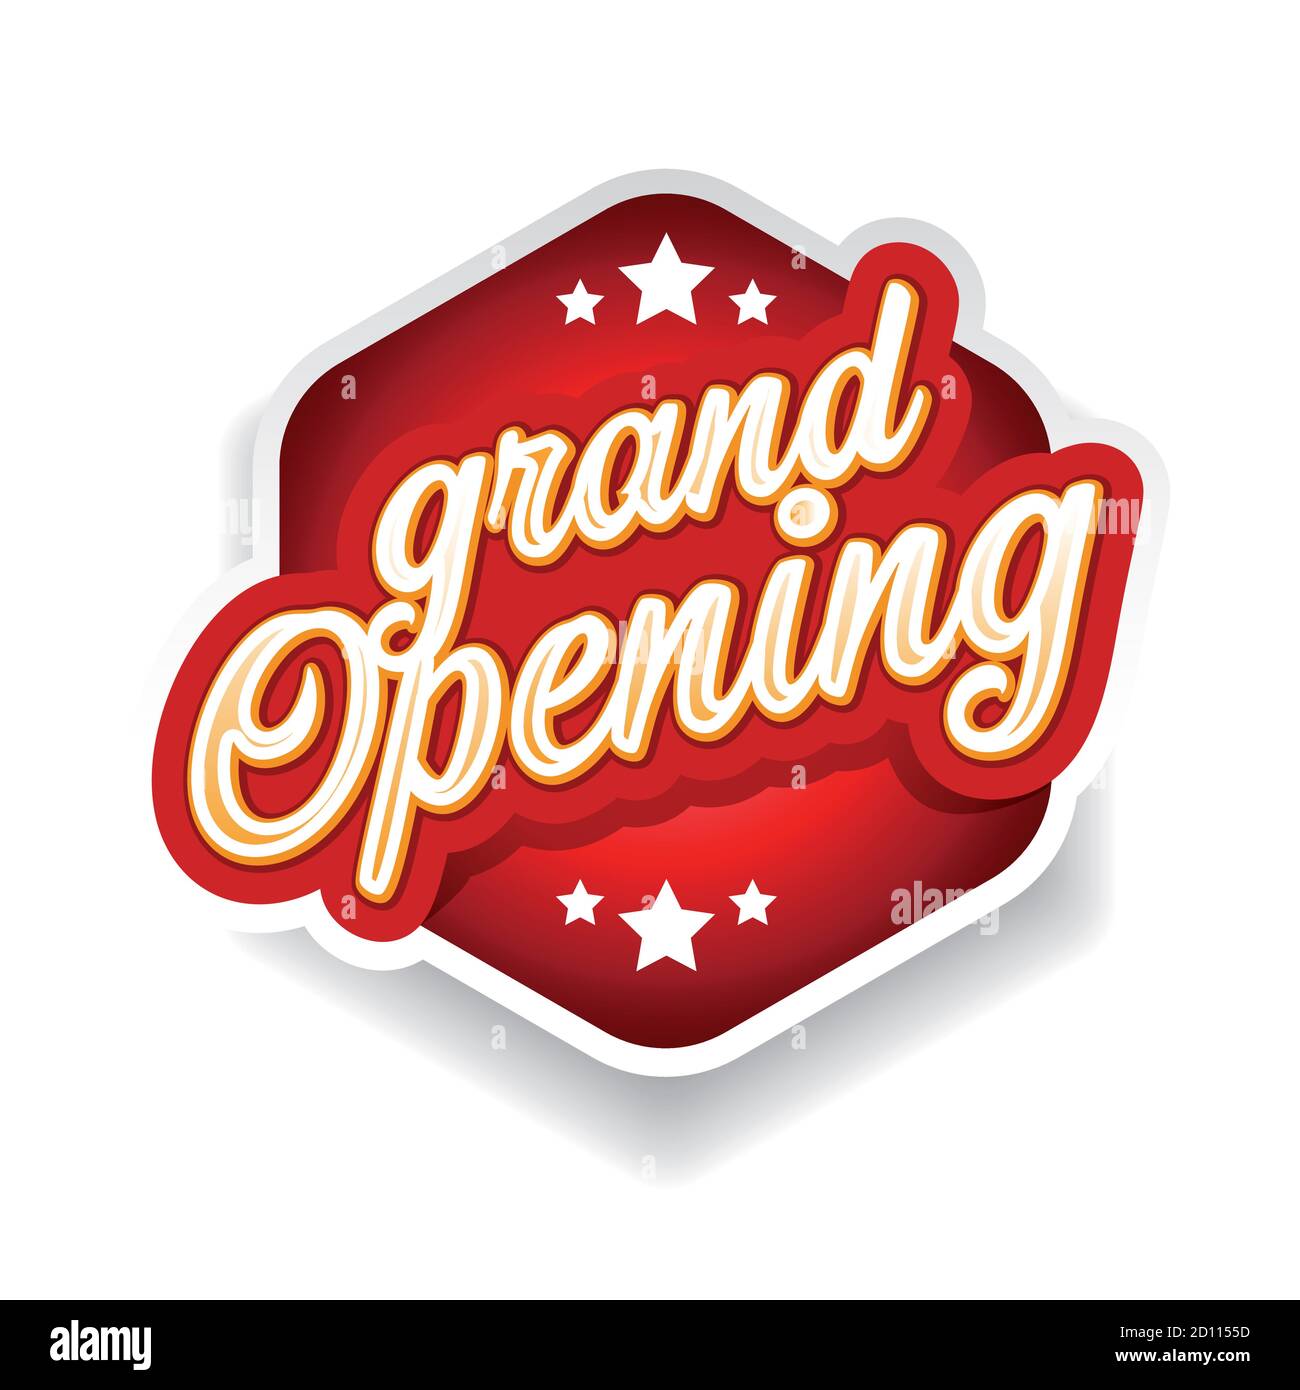 Grand Opening vintage sign red Stock Vector